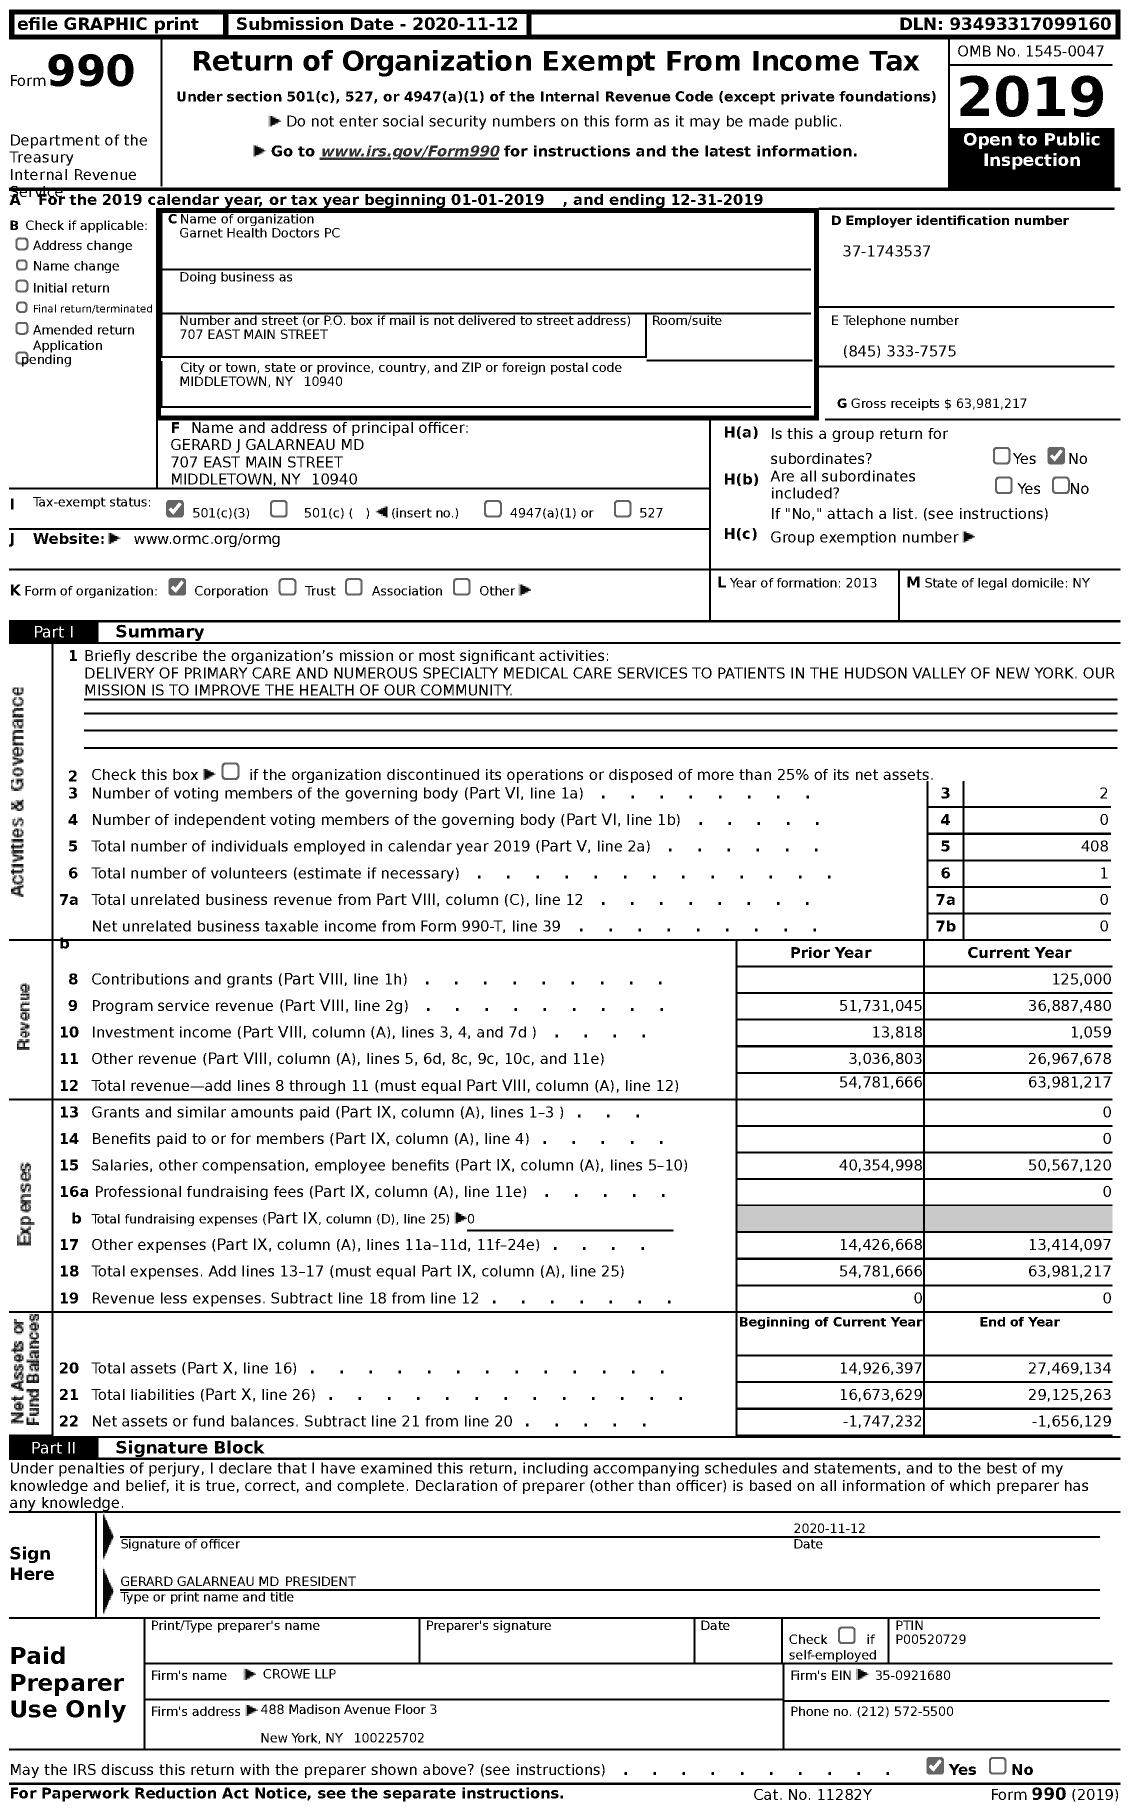 Image of first page of 2019 Form 990 for Garnet Health Doctors PC (GHVHS)